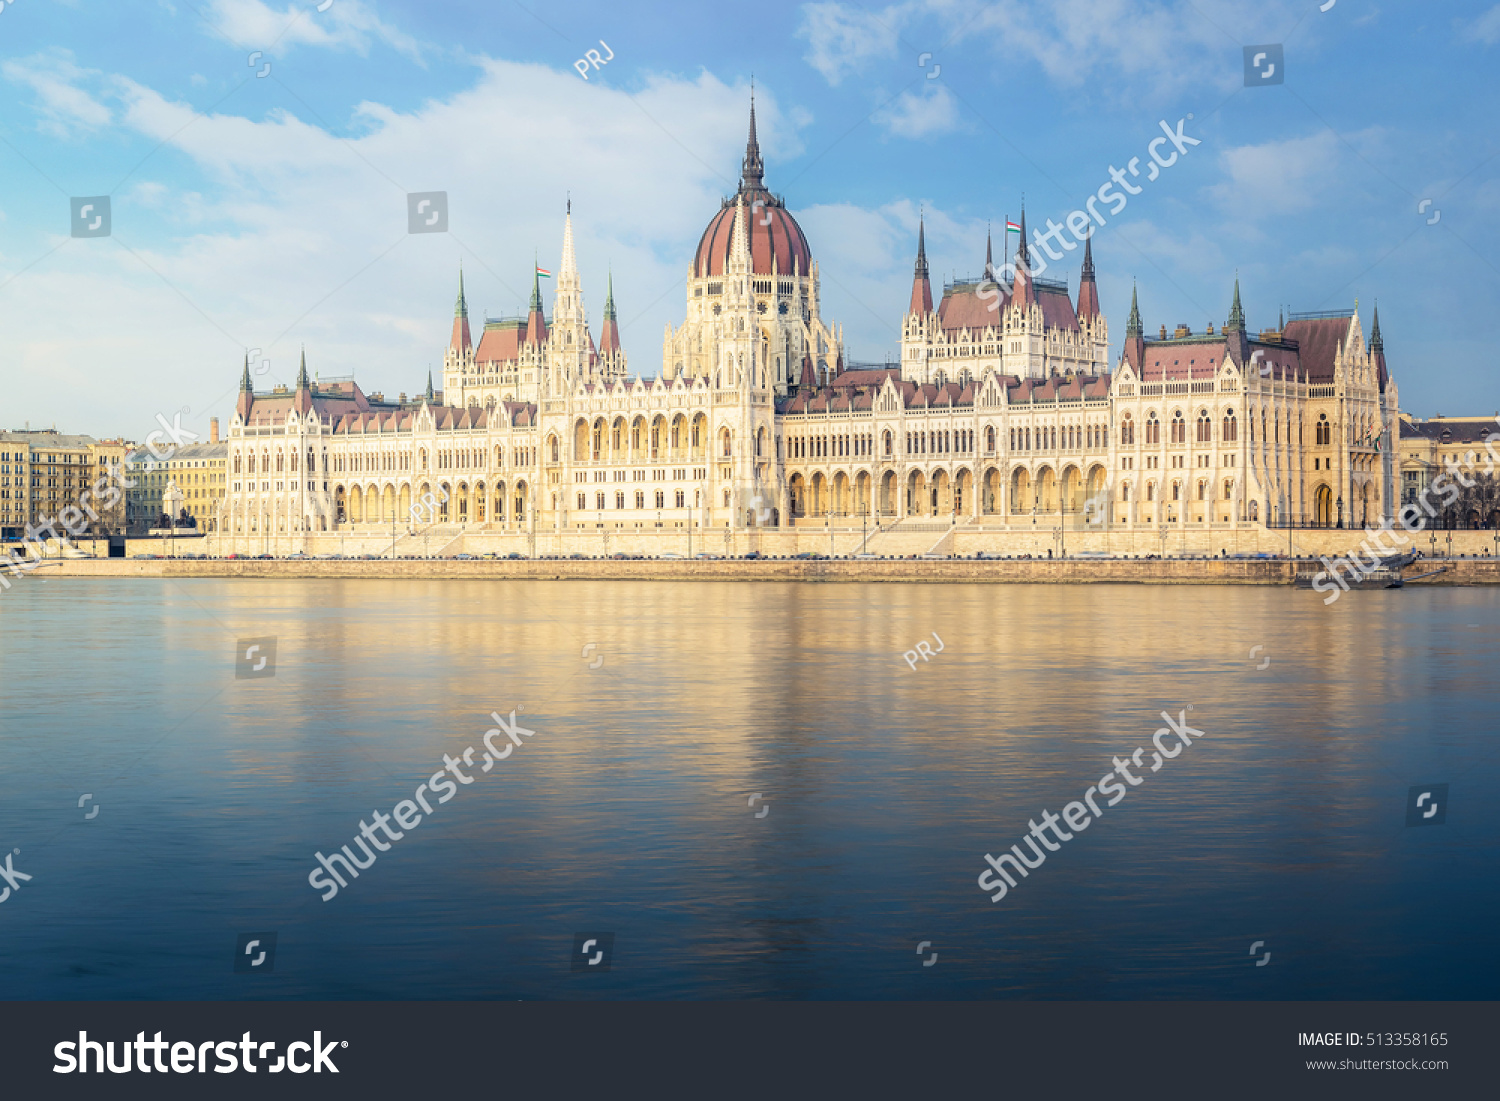 Hungarian Parliament Building - Budapest , Hungary in March 2016 : built in 1904 Gothic Revival style, ,highlight of Budapest